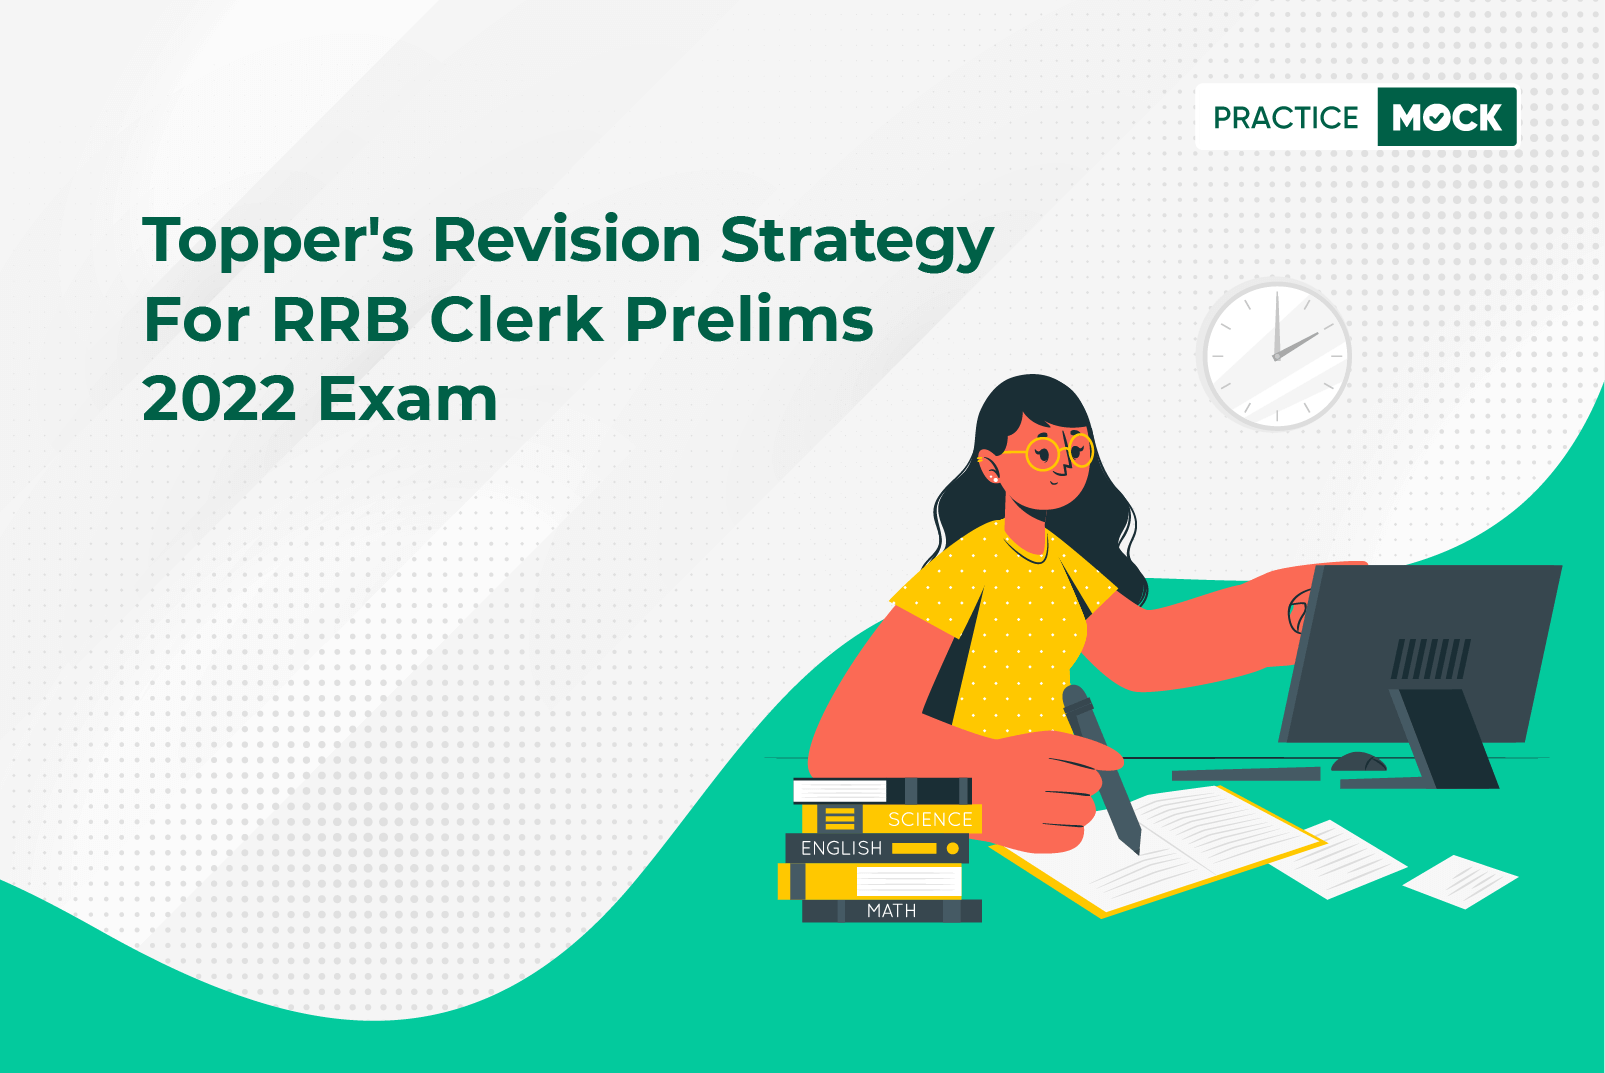 Topper's Revision Strategy for RRB Clerk Prelims 2022 Exam